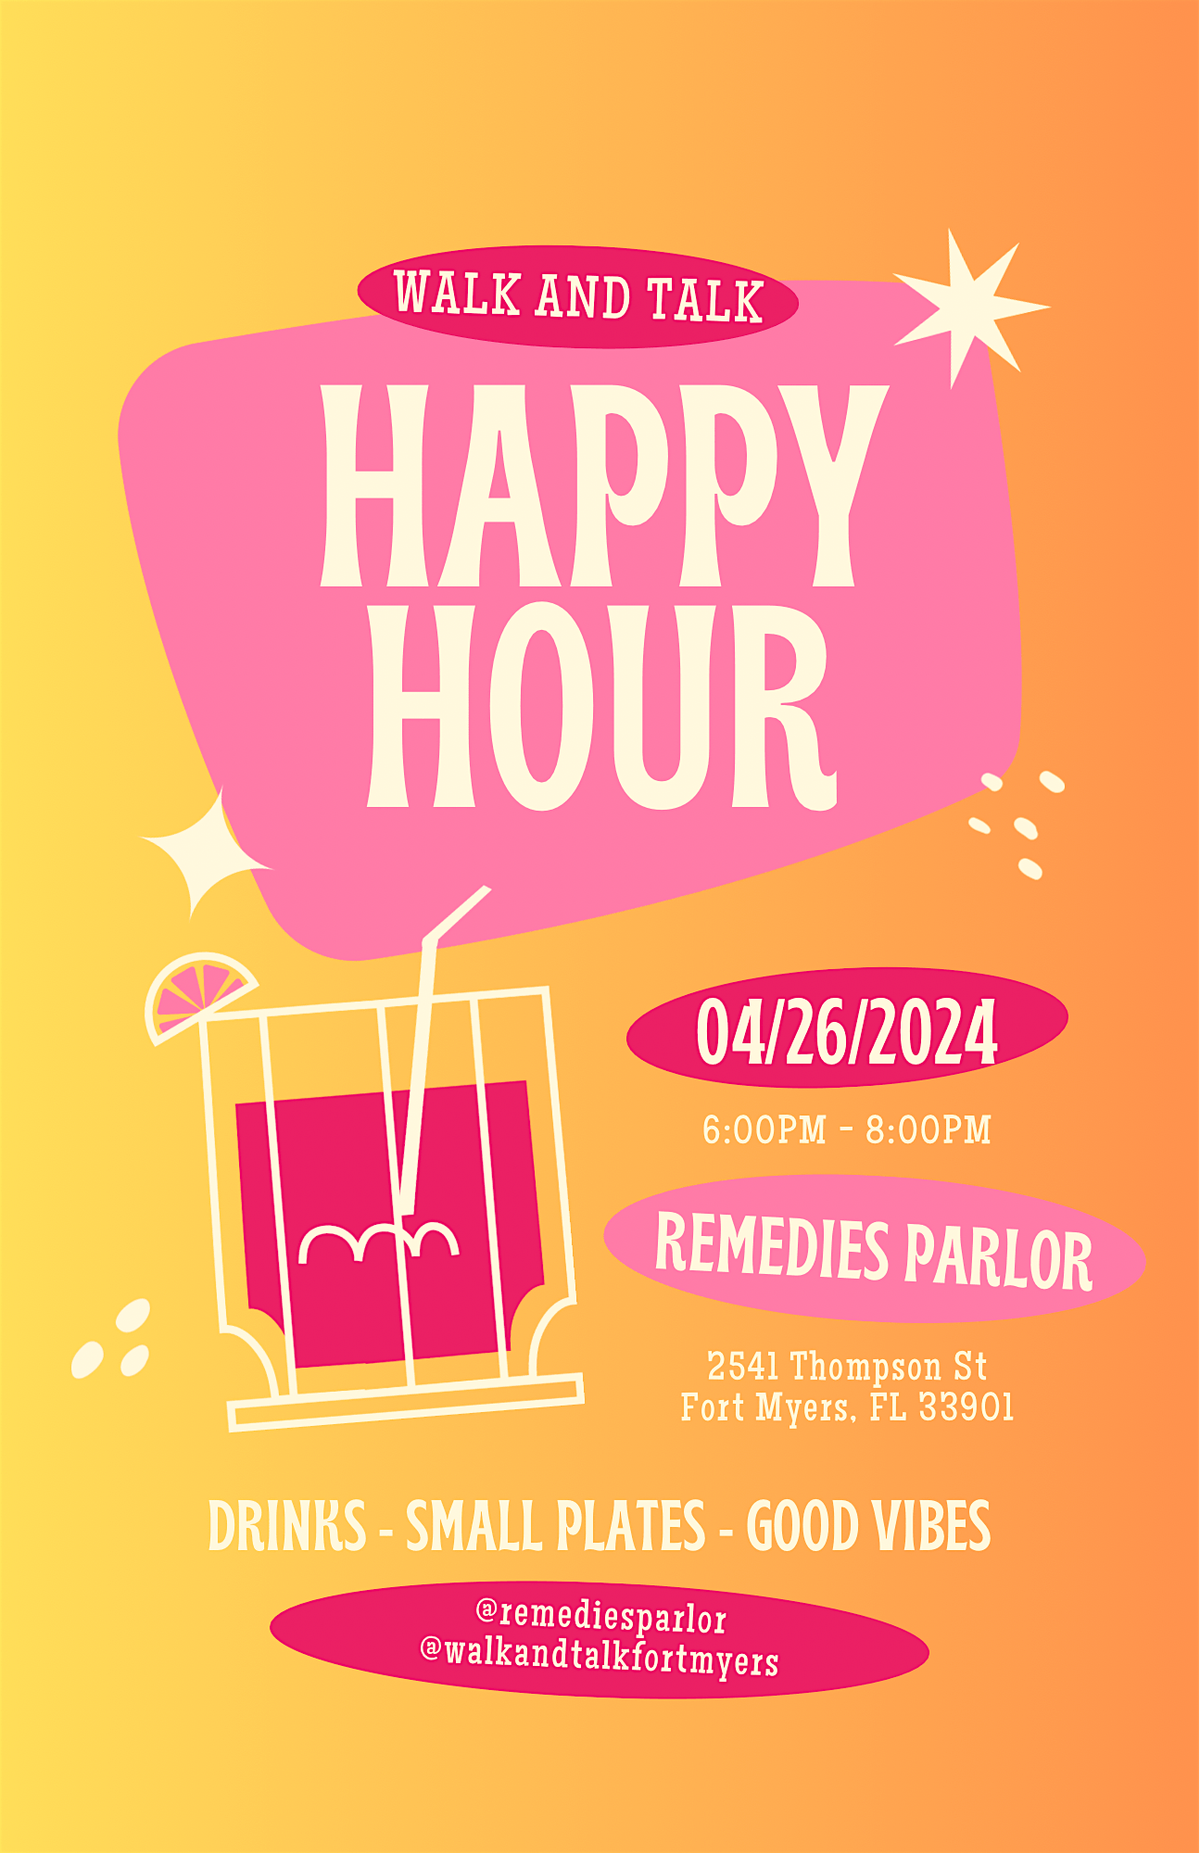 Happy Hour hosted by Walk and Talk